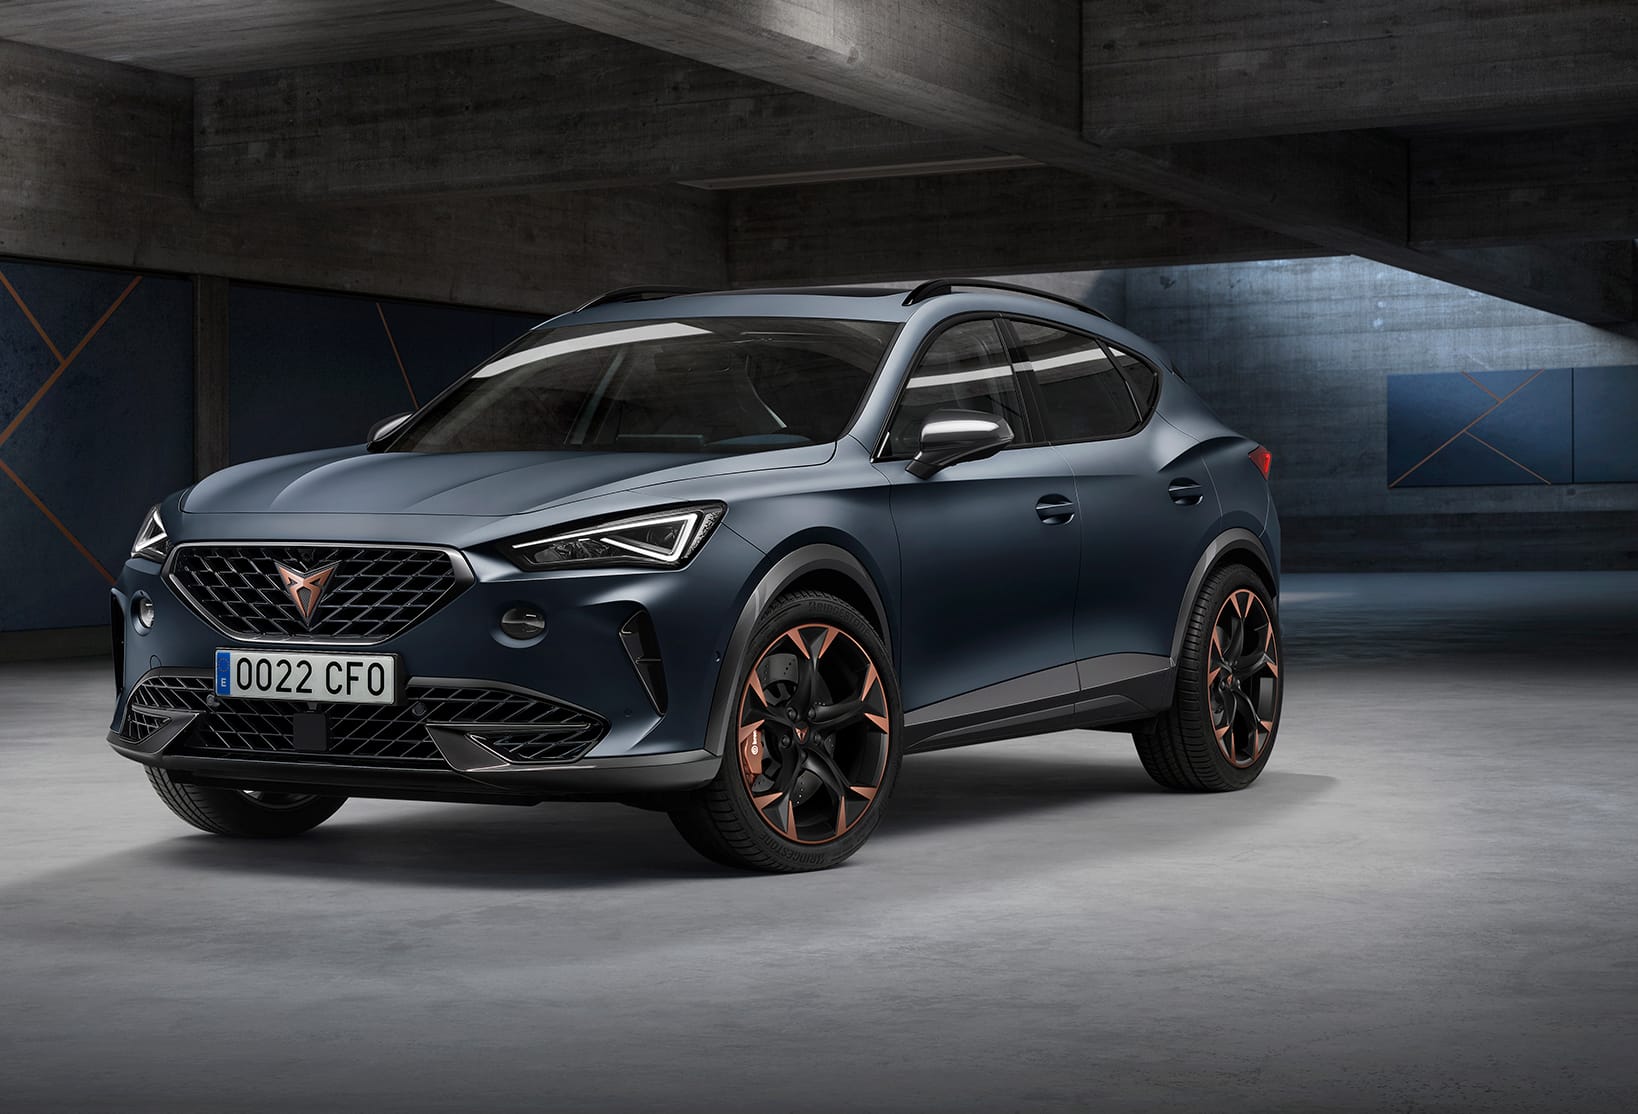 New CUPRA Formentor front view the suv coupe